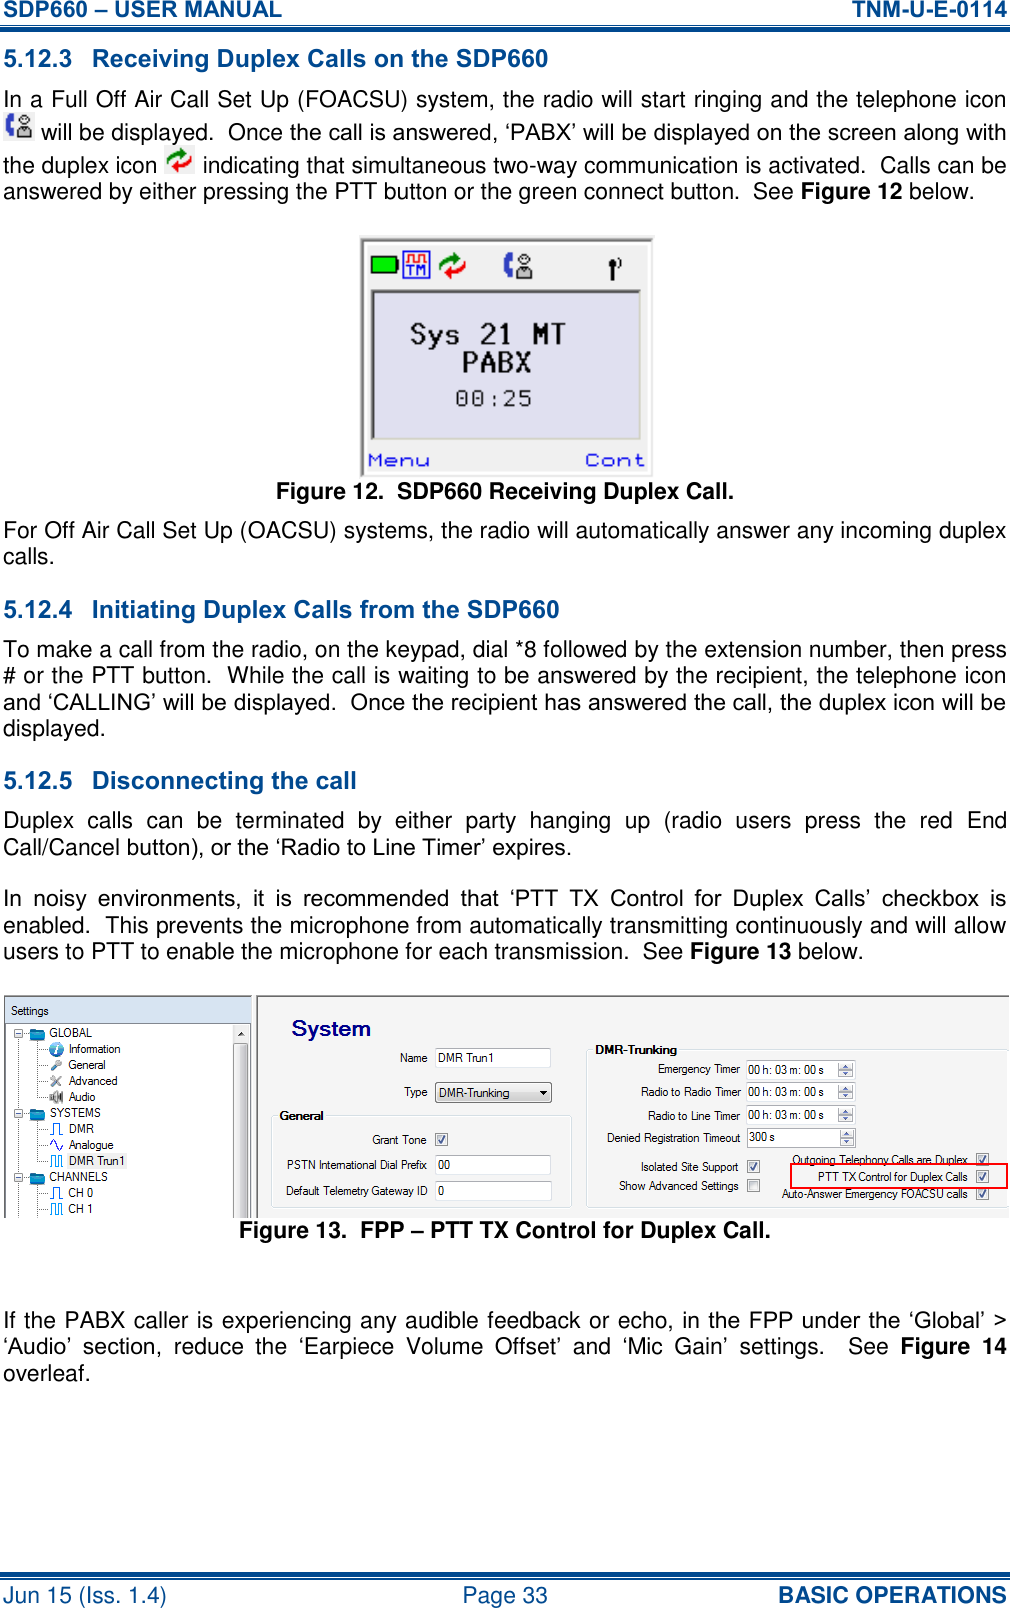 SDP660 – USER MANUAL  TNM-U-E-0114 Jun 15 (Iss. 1.4)  Page 33 BASIC OPERATIONS 5.12.3 Receiving Duplex Calls on the SDP660 In a Full Off Air Call Set Up (FOACSU) system, the radio will start ringing and the telephone icon  will be displayed.  Once the call is answered, ‘PABX’ will be displayed on the screen along with the duplex icon   indicating that simultaneous two-way communication is activated.  Calls can be answered by either pressing the PTT button or the green connect button.  See Figure 12 below. Figure 12.  SDP660 Receiving Duplex Call. For Off Air Call Set Up (OACSU) systems, the radio will automatically answer any incoming duplex calls. 5.12.4 Initiating Duplex Calls from the SDP660 To make a call from the radio, on the keypad, dial *8 followed by the extension number, then press # or the PTT button.  While the call is waiting to be answered by the recipient, the telephone icon and ‘CALLING’ will be displayed.  Once the recipient has answered the call, the duplex icon will be displayed. 5.12.5 Disconnecting the call Duplex  calls  can  be  terminated  by  either  party  hanging  up  (radio  users  press  the  red  End Call/Cancel button), or the ‘Radio to Line Timer’ expires. In  noisy  environments,  it  is  recommended  that  ‘PTT  TX  Control  for  Duplex  Calls’  checkbox  is enabled.  This prevents the microphone from automatically transmitting continuously and will allow users to PTT to enable the microphone for each transmission.  See Figure 13 below. Figure 13.  FPP – PTT TX Control for Duplex Call.  If the PABX caller is experiencing any audible feedback or echo, in the FPP under the ‘Global’ &gt; ‘Audio’  section,  reduce  the  ‘Earpiece  Volume  Offset’ and  ‘Mic  Gain’  settings.  See  Figure  14 overleaf. 